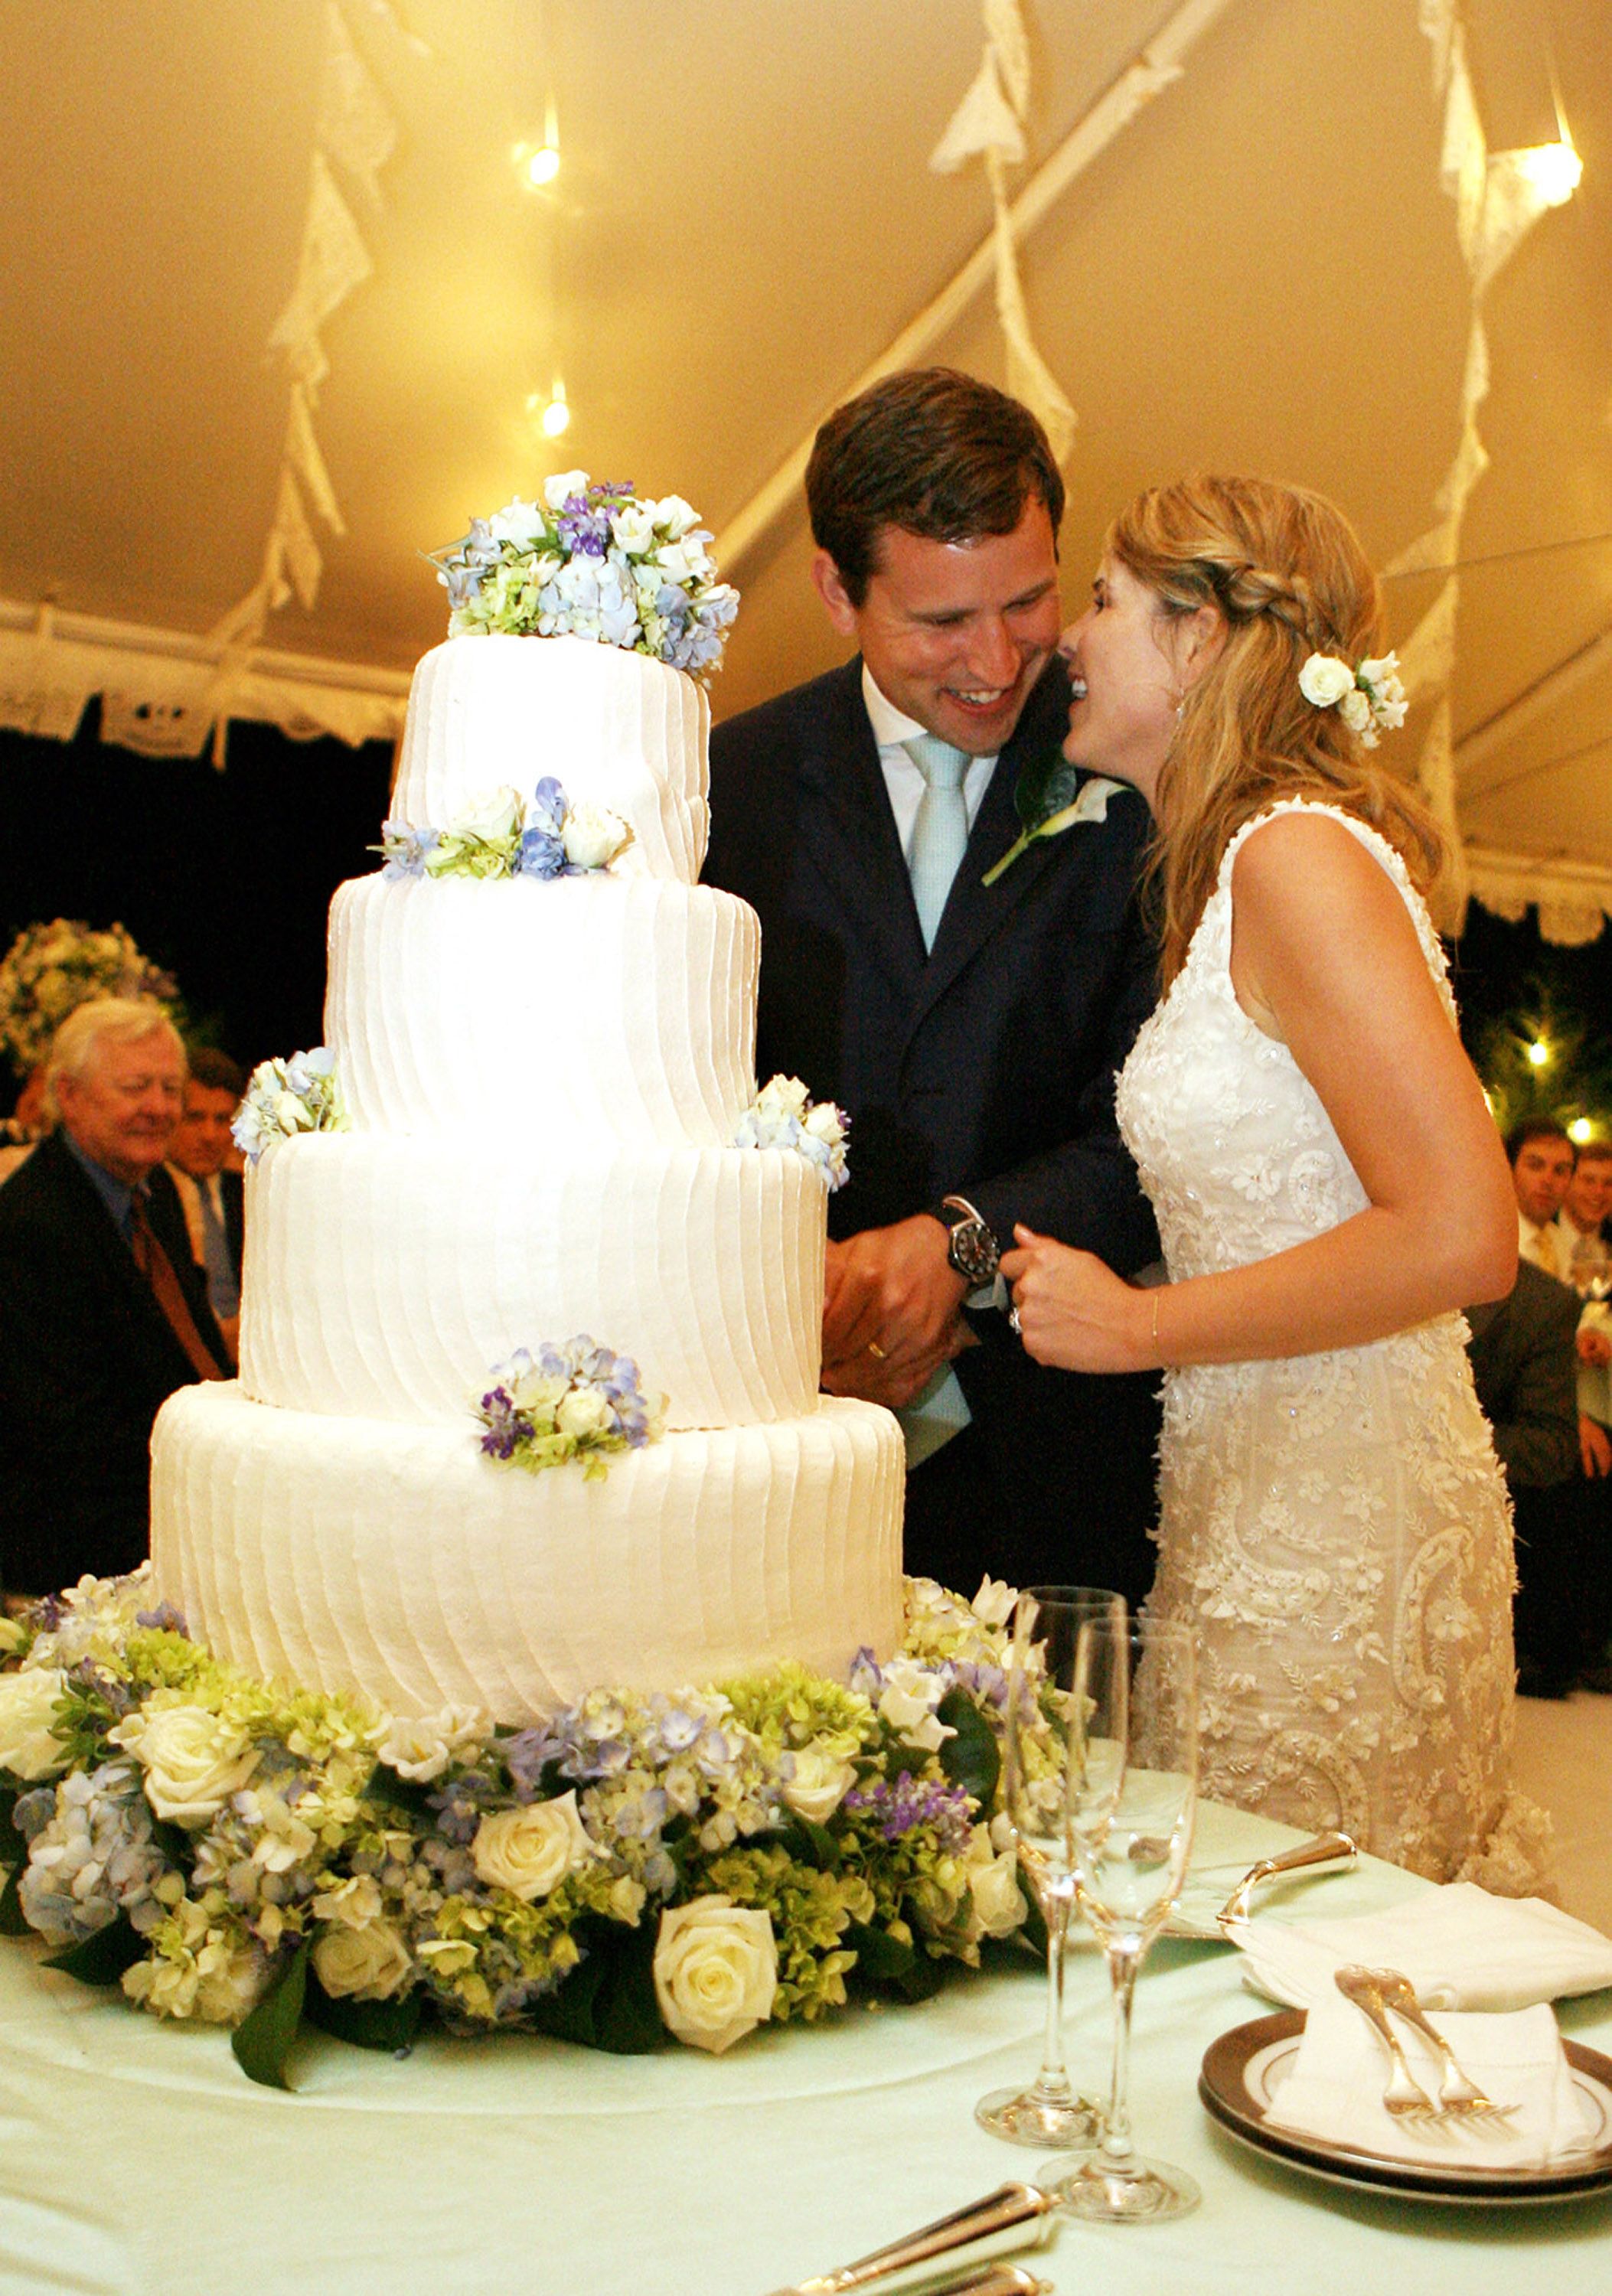 Jenna Bush and Henry Hager at their wedding, March 2008, Texas| Photo: Getty Images